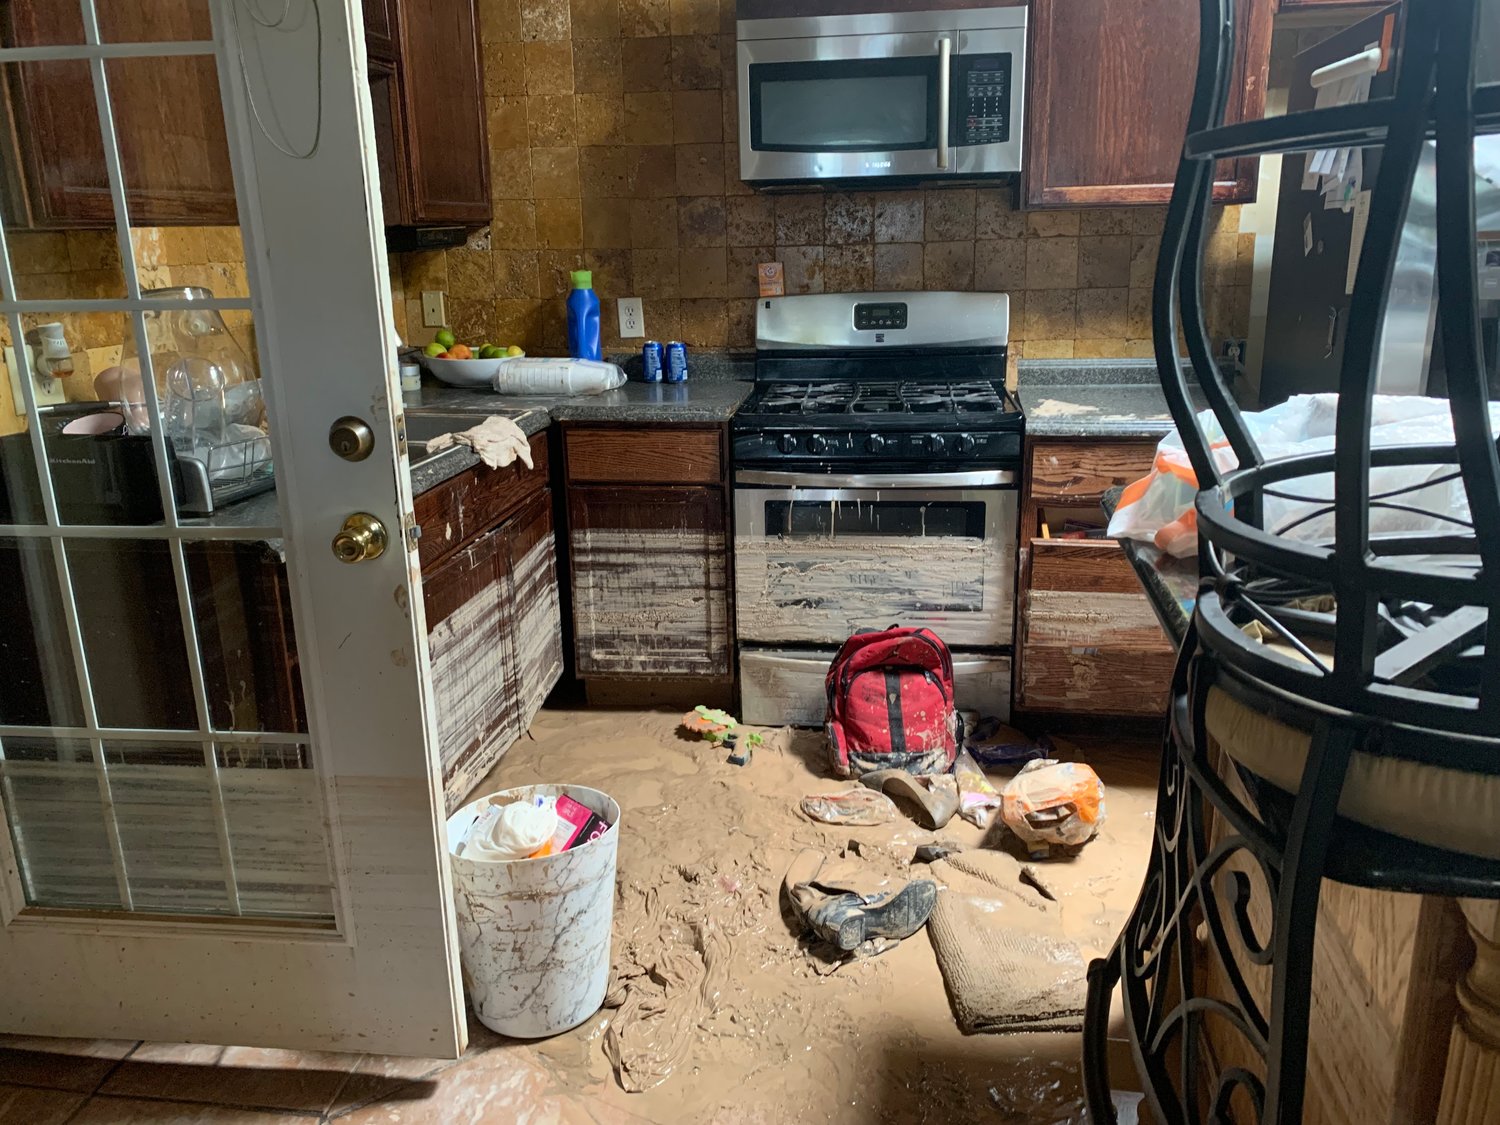 The Aguirre family kitchen will likely never see a meal cooked in it again as the home seems damaged beyond repair following the La Union floods.